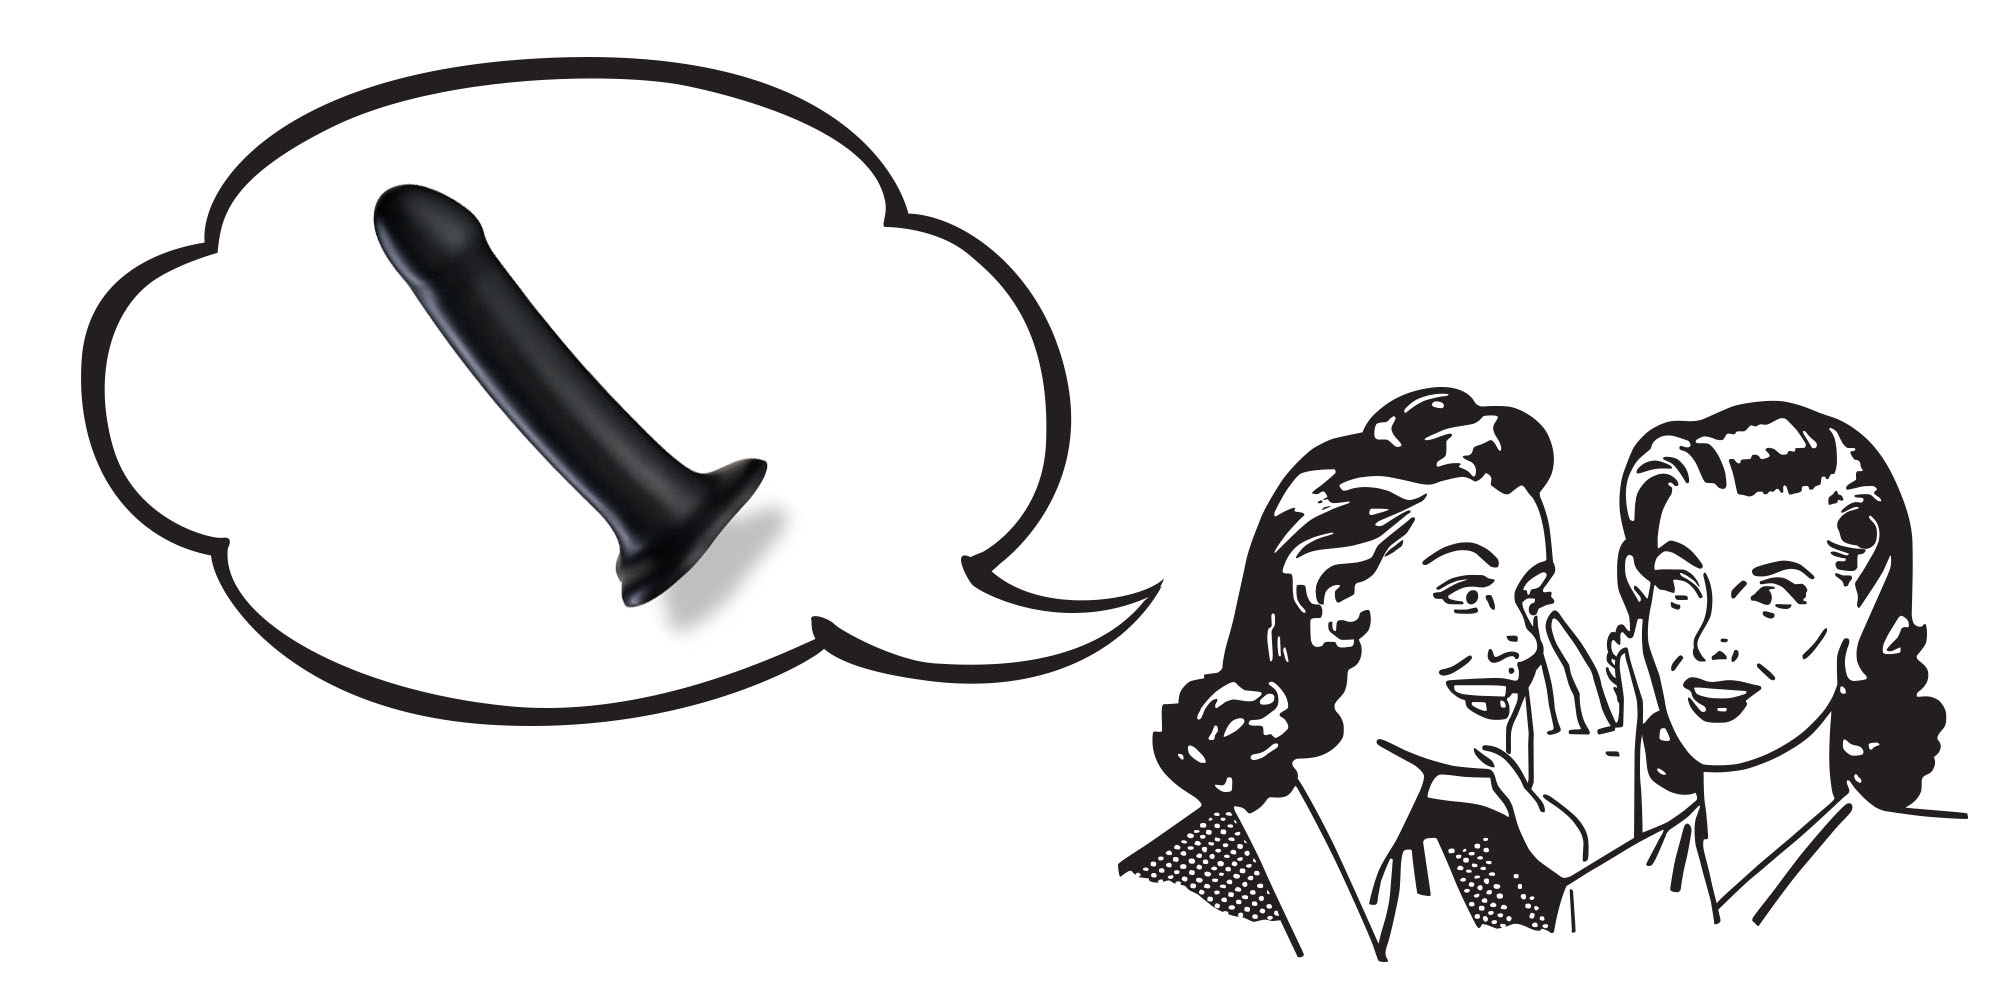 Two illustrated women whispering to each other; above their heads is a speech bubble containing an image of a black silicone dildo.